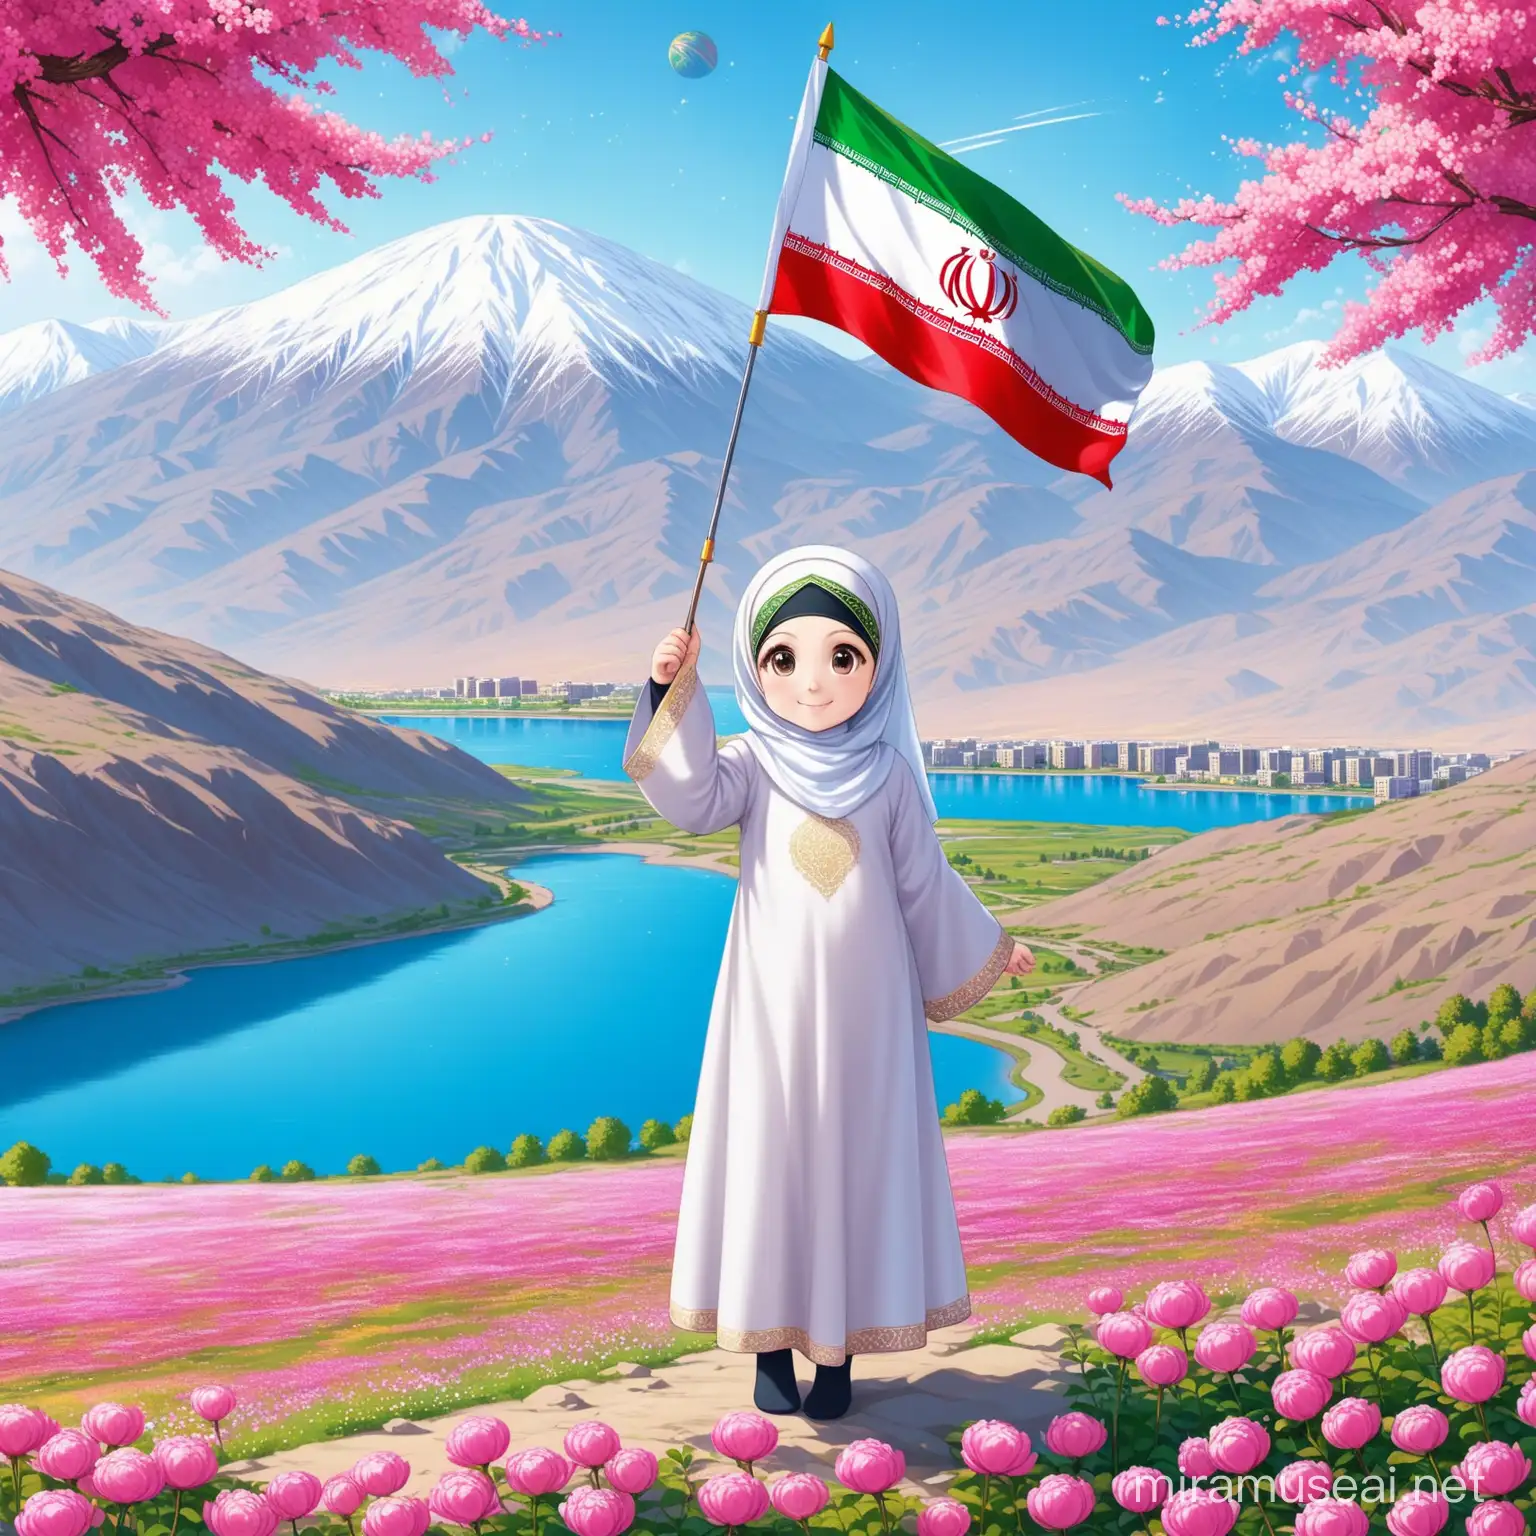 Persian little girl(full height, Muslim, with emphasis no hair out of veil(Hijab), small eyes, bigger nose, white skin, cute, smiling, wearing socks, nice flag of Iran in hand with pride, clothes full of Persian designs).
Atmosphere Damavand mountain, Iranian satellite and full of many pink flowers, lake, sparing.